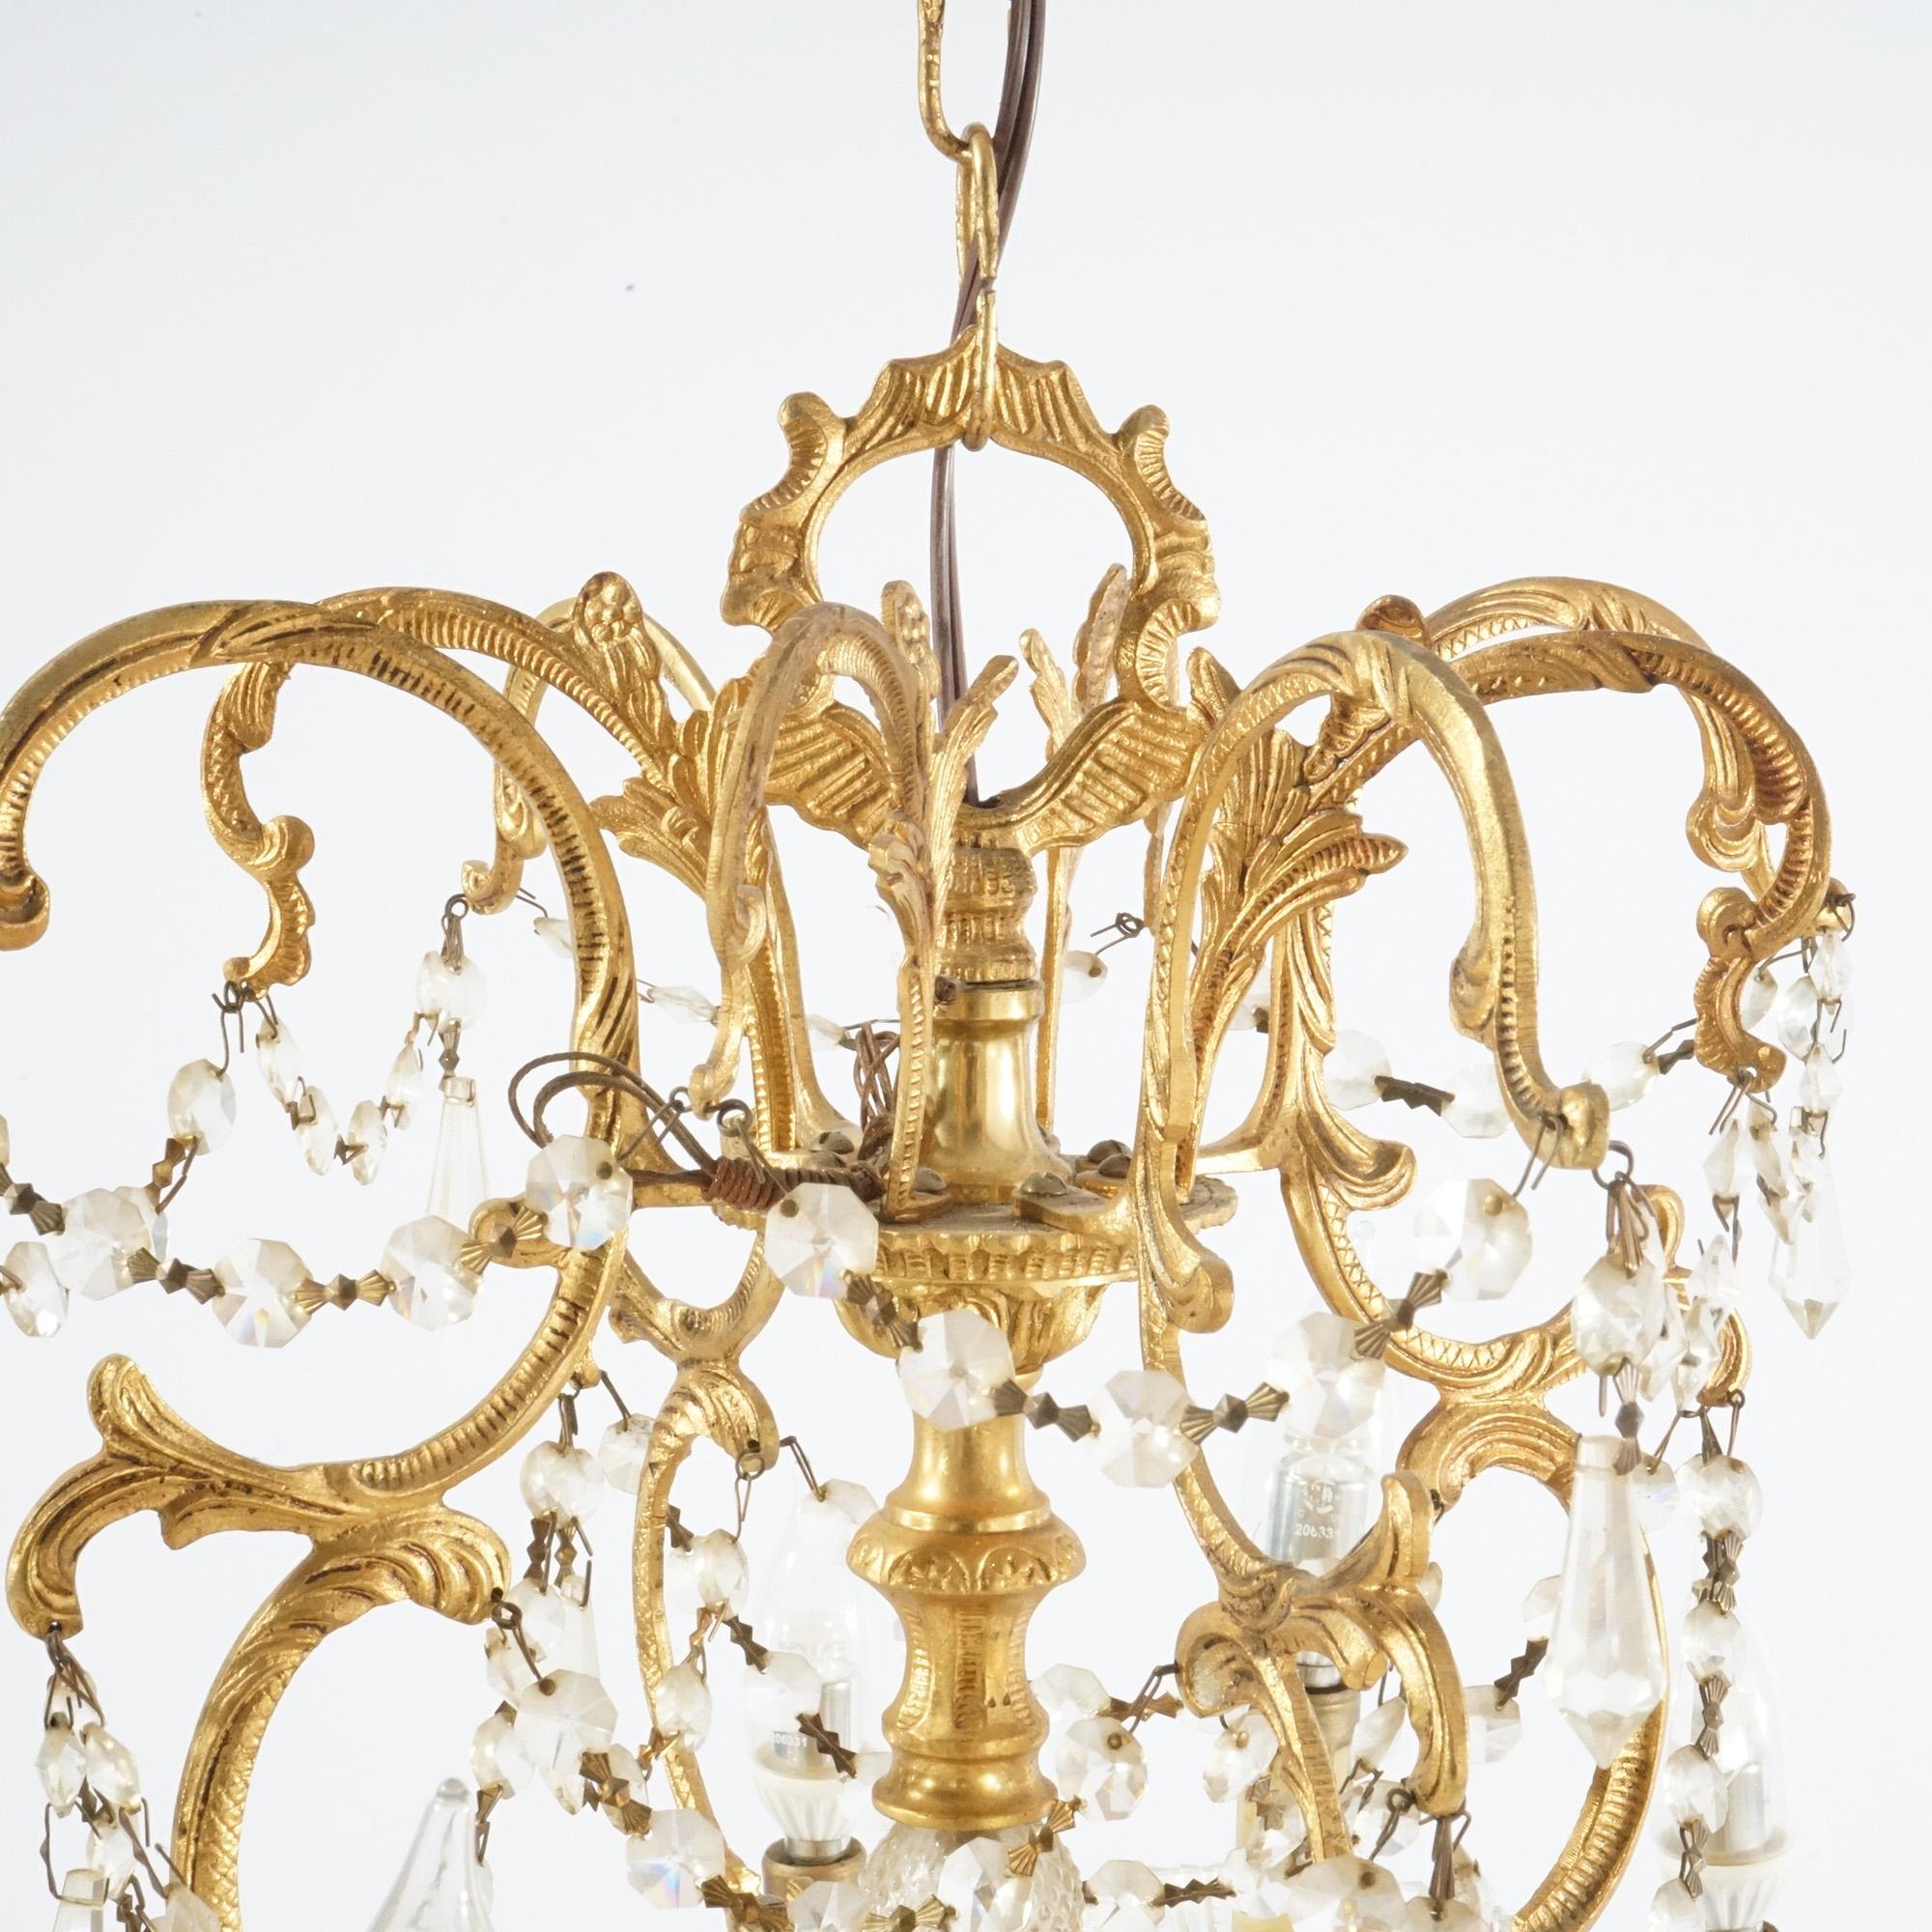 20th Century French Style Gilt & Crystal Twelve-Light Tiered Chandelier, Circa 1930 For Sale